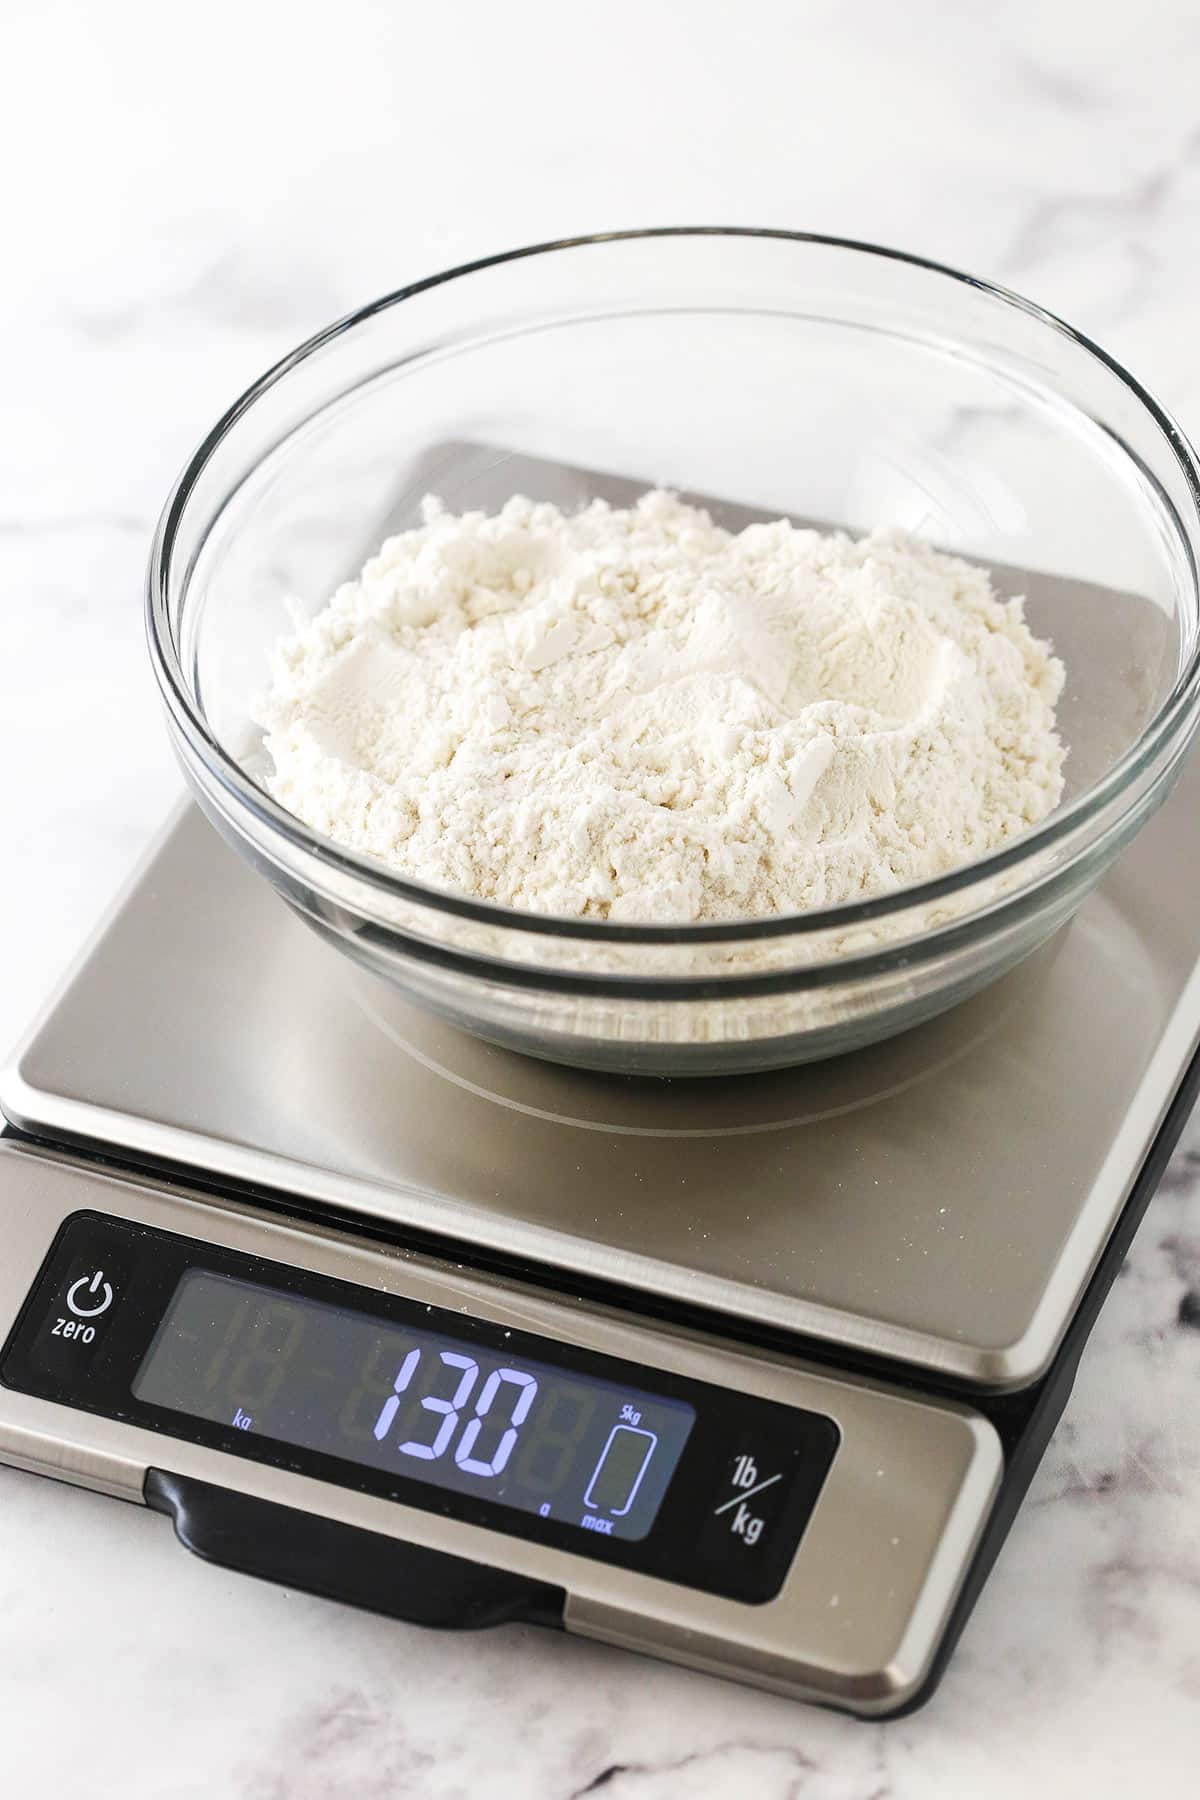 One cup of flour on a kitchen scale that reads 130 grams on the screen